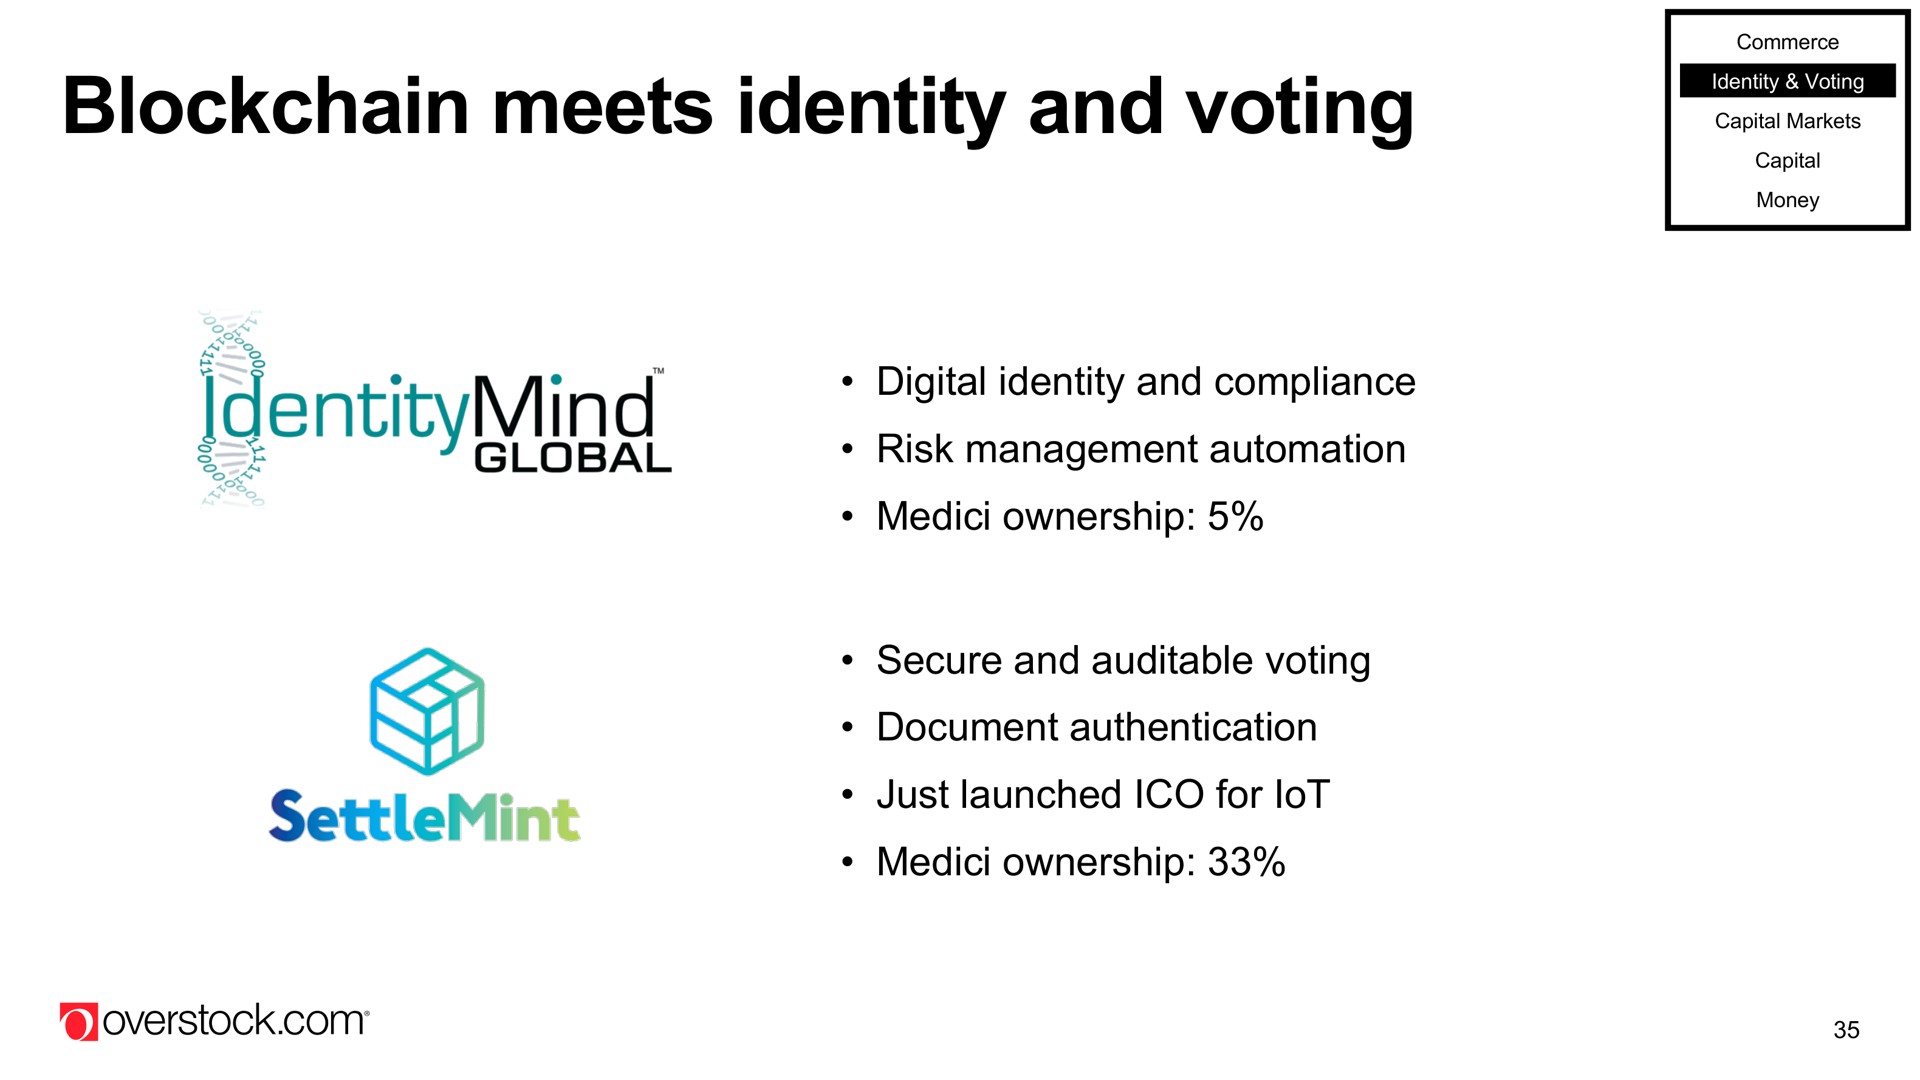 meets identity and voting digital identity and compliance risk management ownership secure and voting document authentication just launched for ownership | Overstock